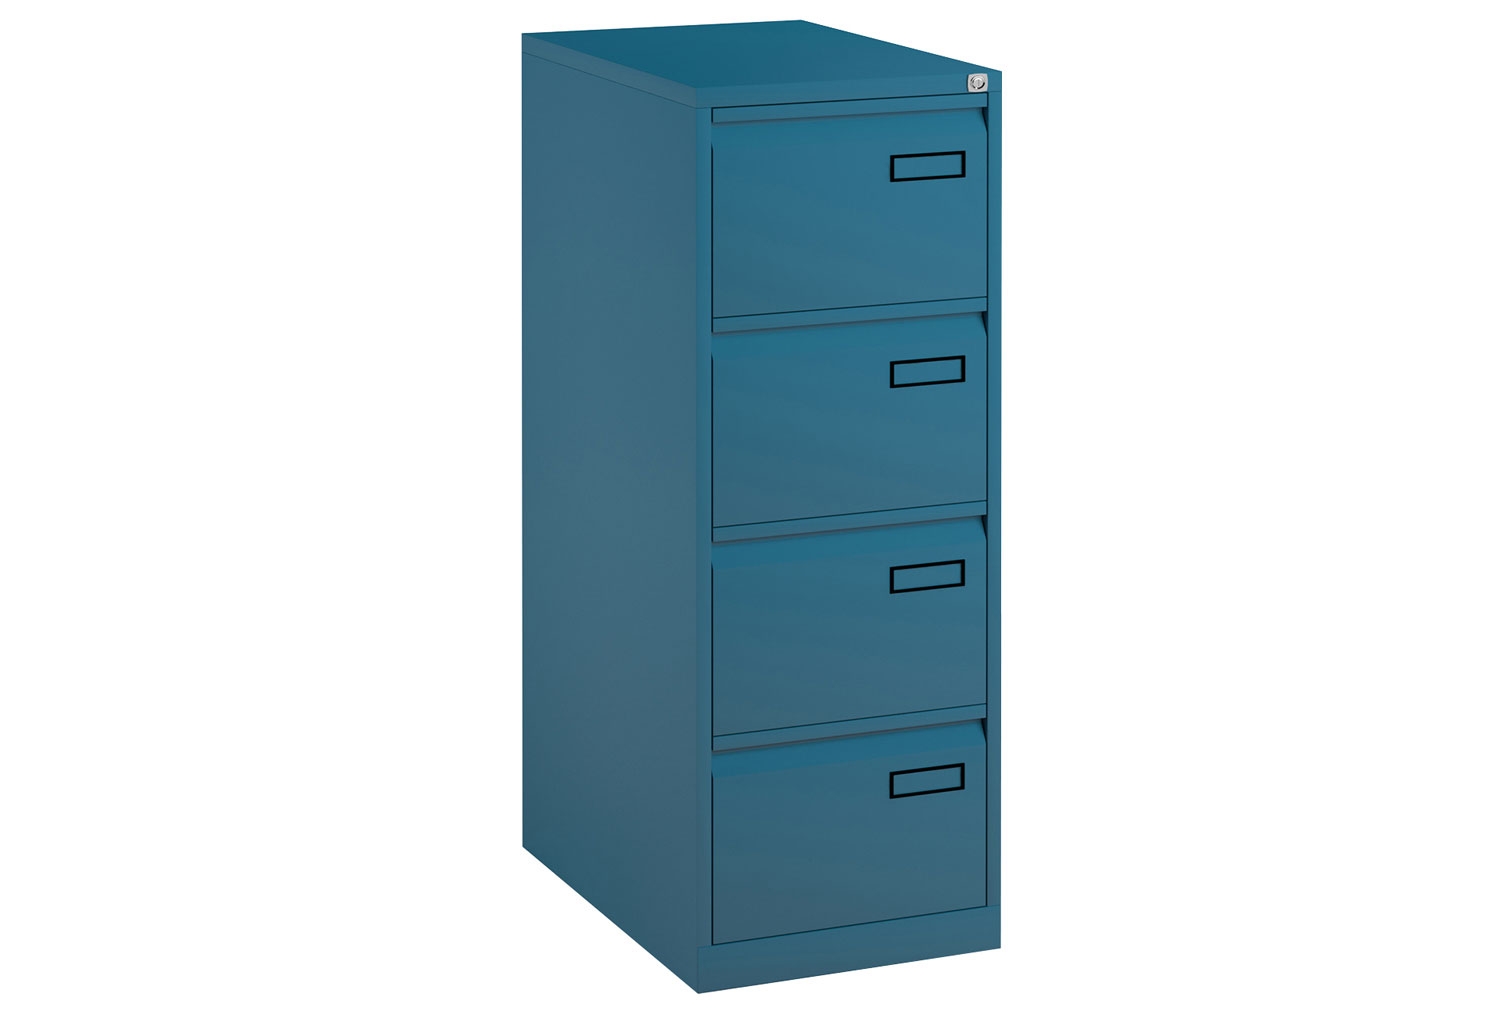 Executive Filing Cabinet, 4 Drawer - 47wx62dx132h (cm), Blue, Fully Installed